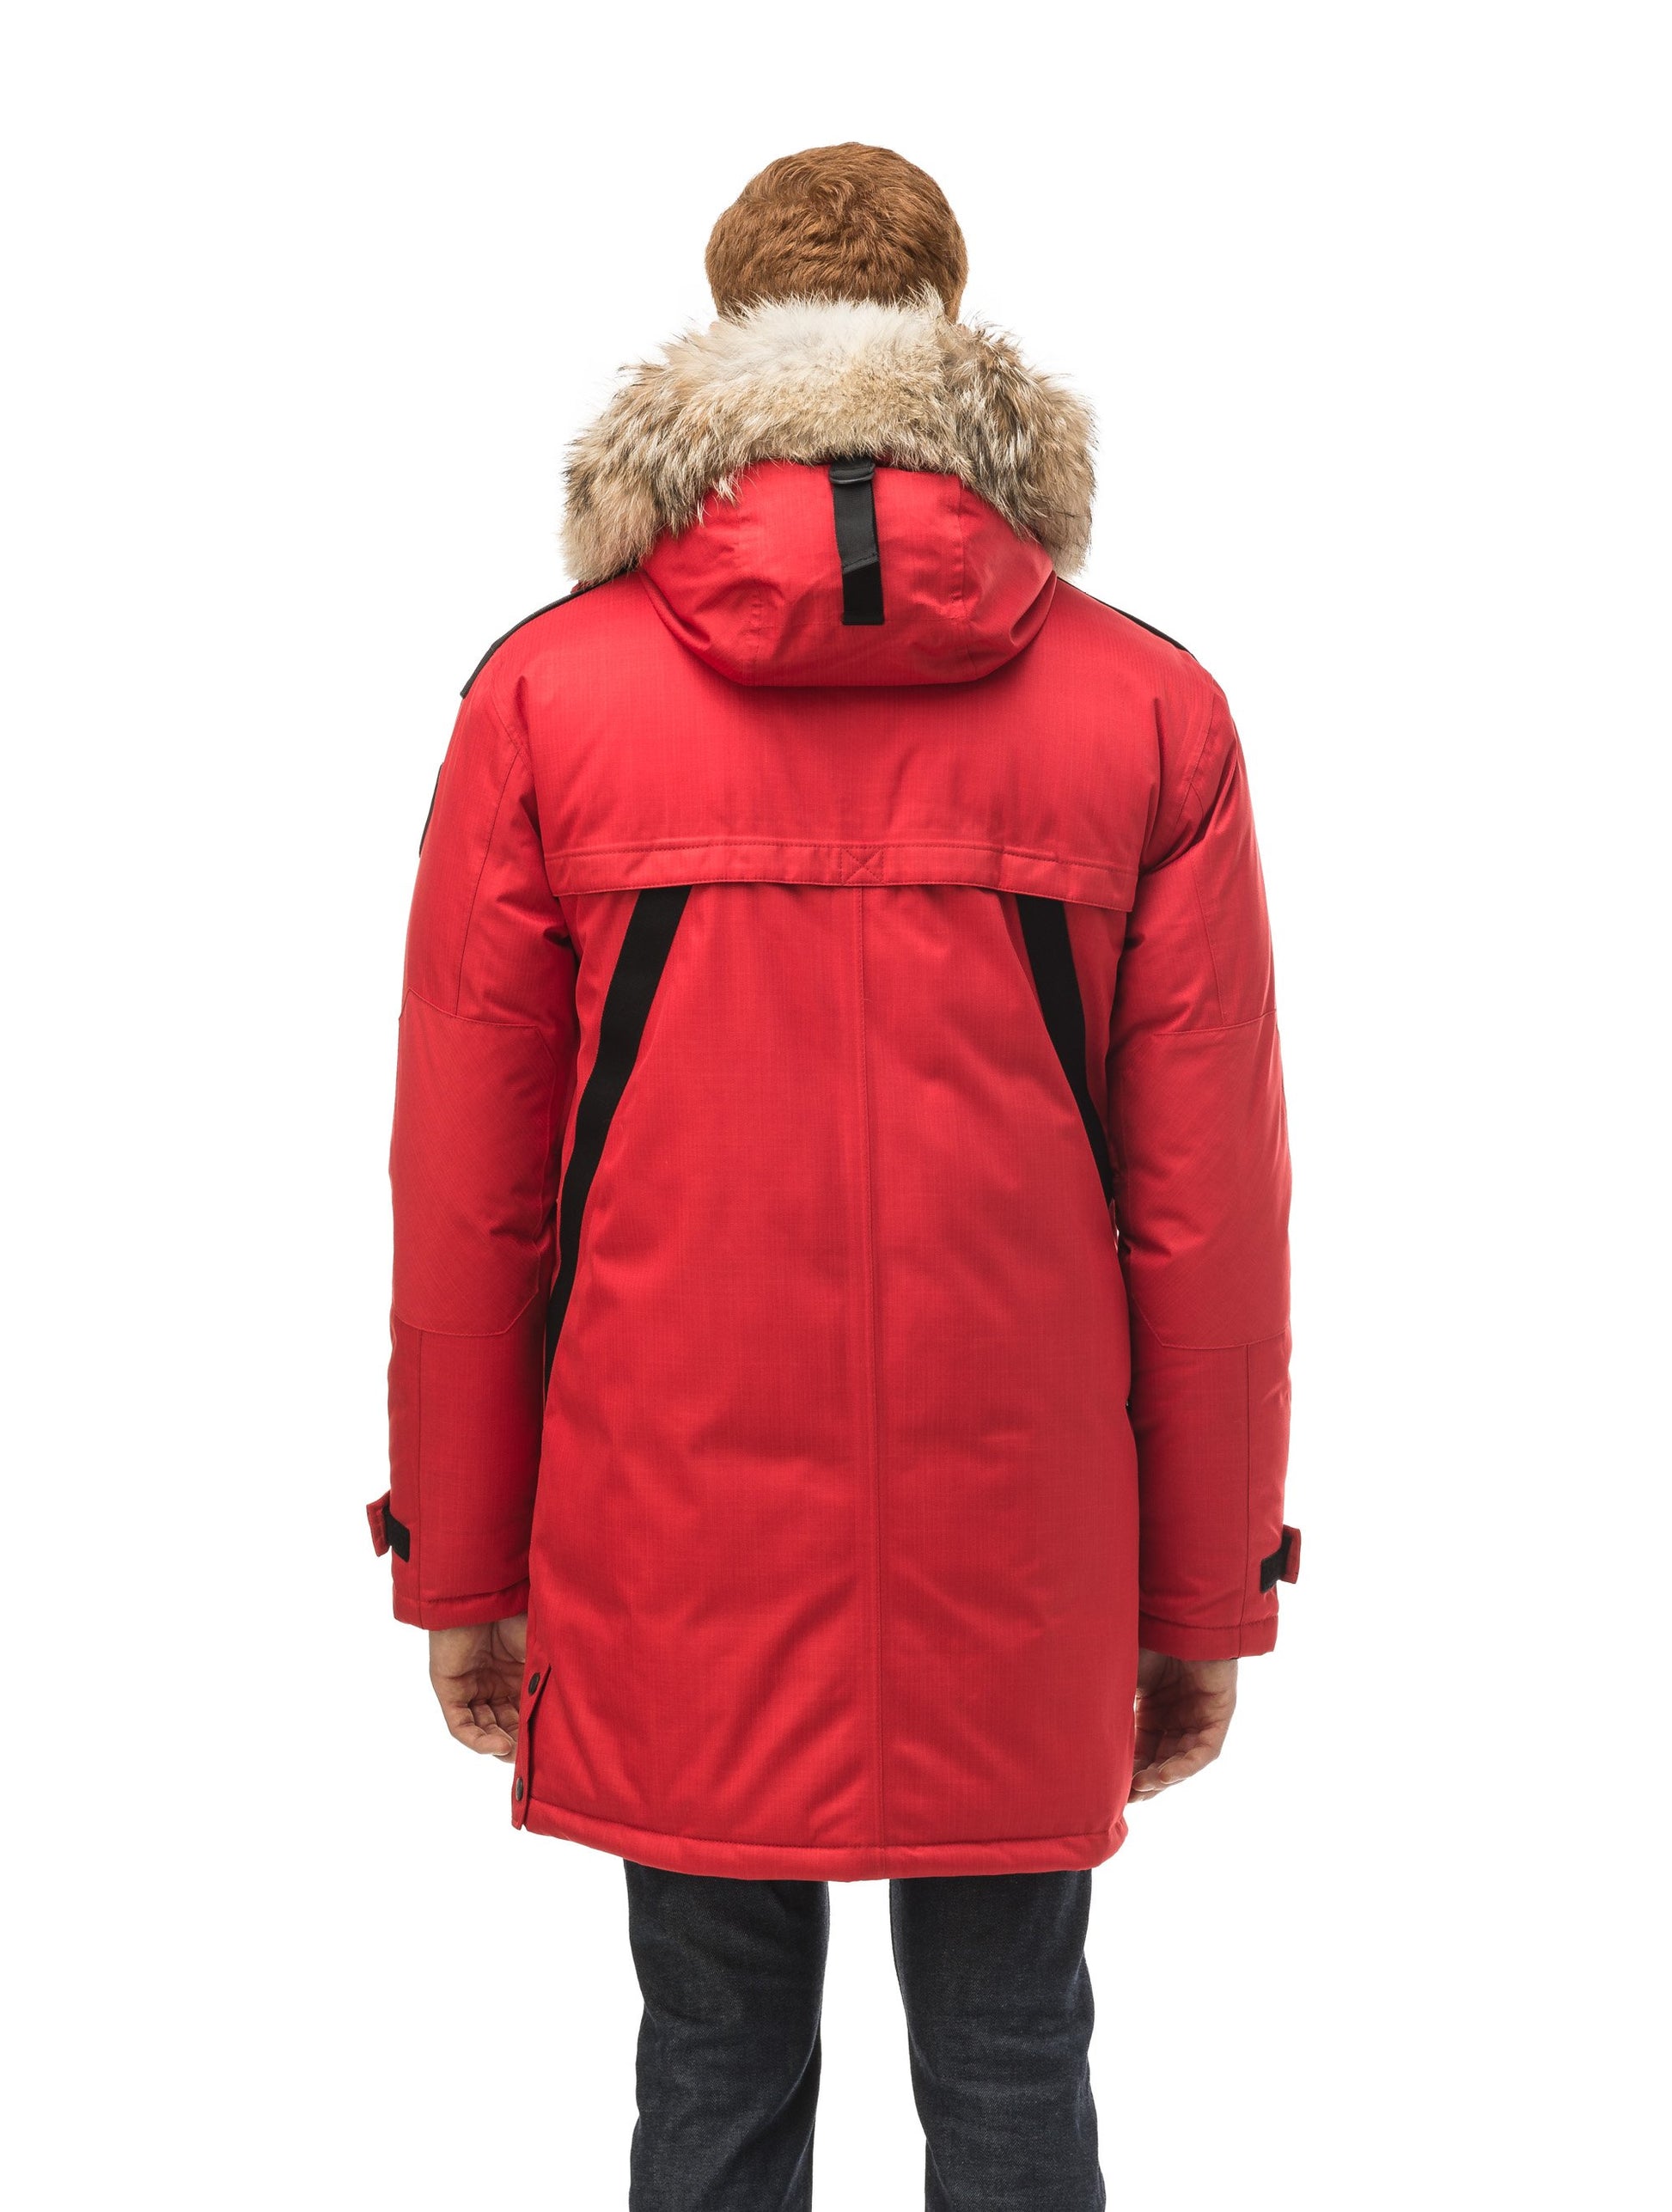 Men's Best Selling Parka the Yatesy is a down filled jacket with a zipper closure and magnetic placket in CH Red